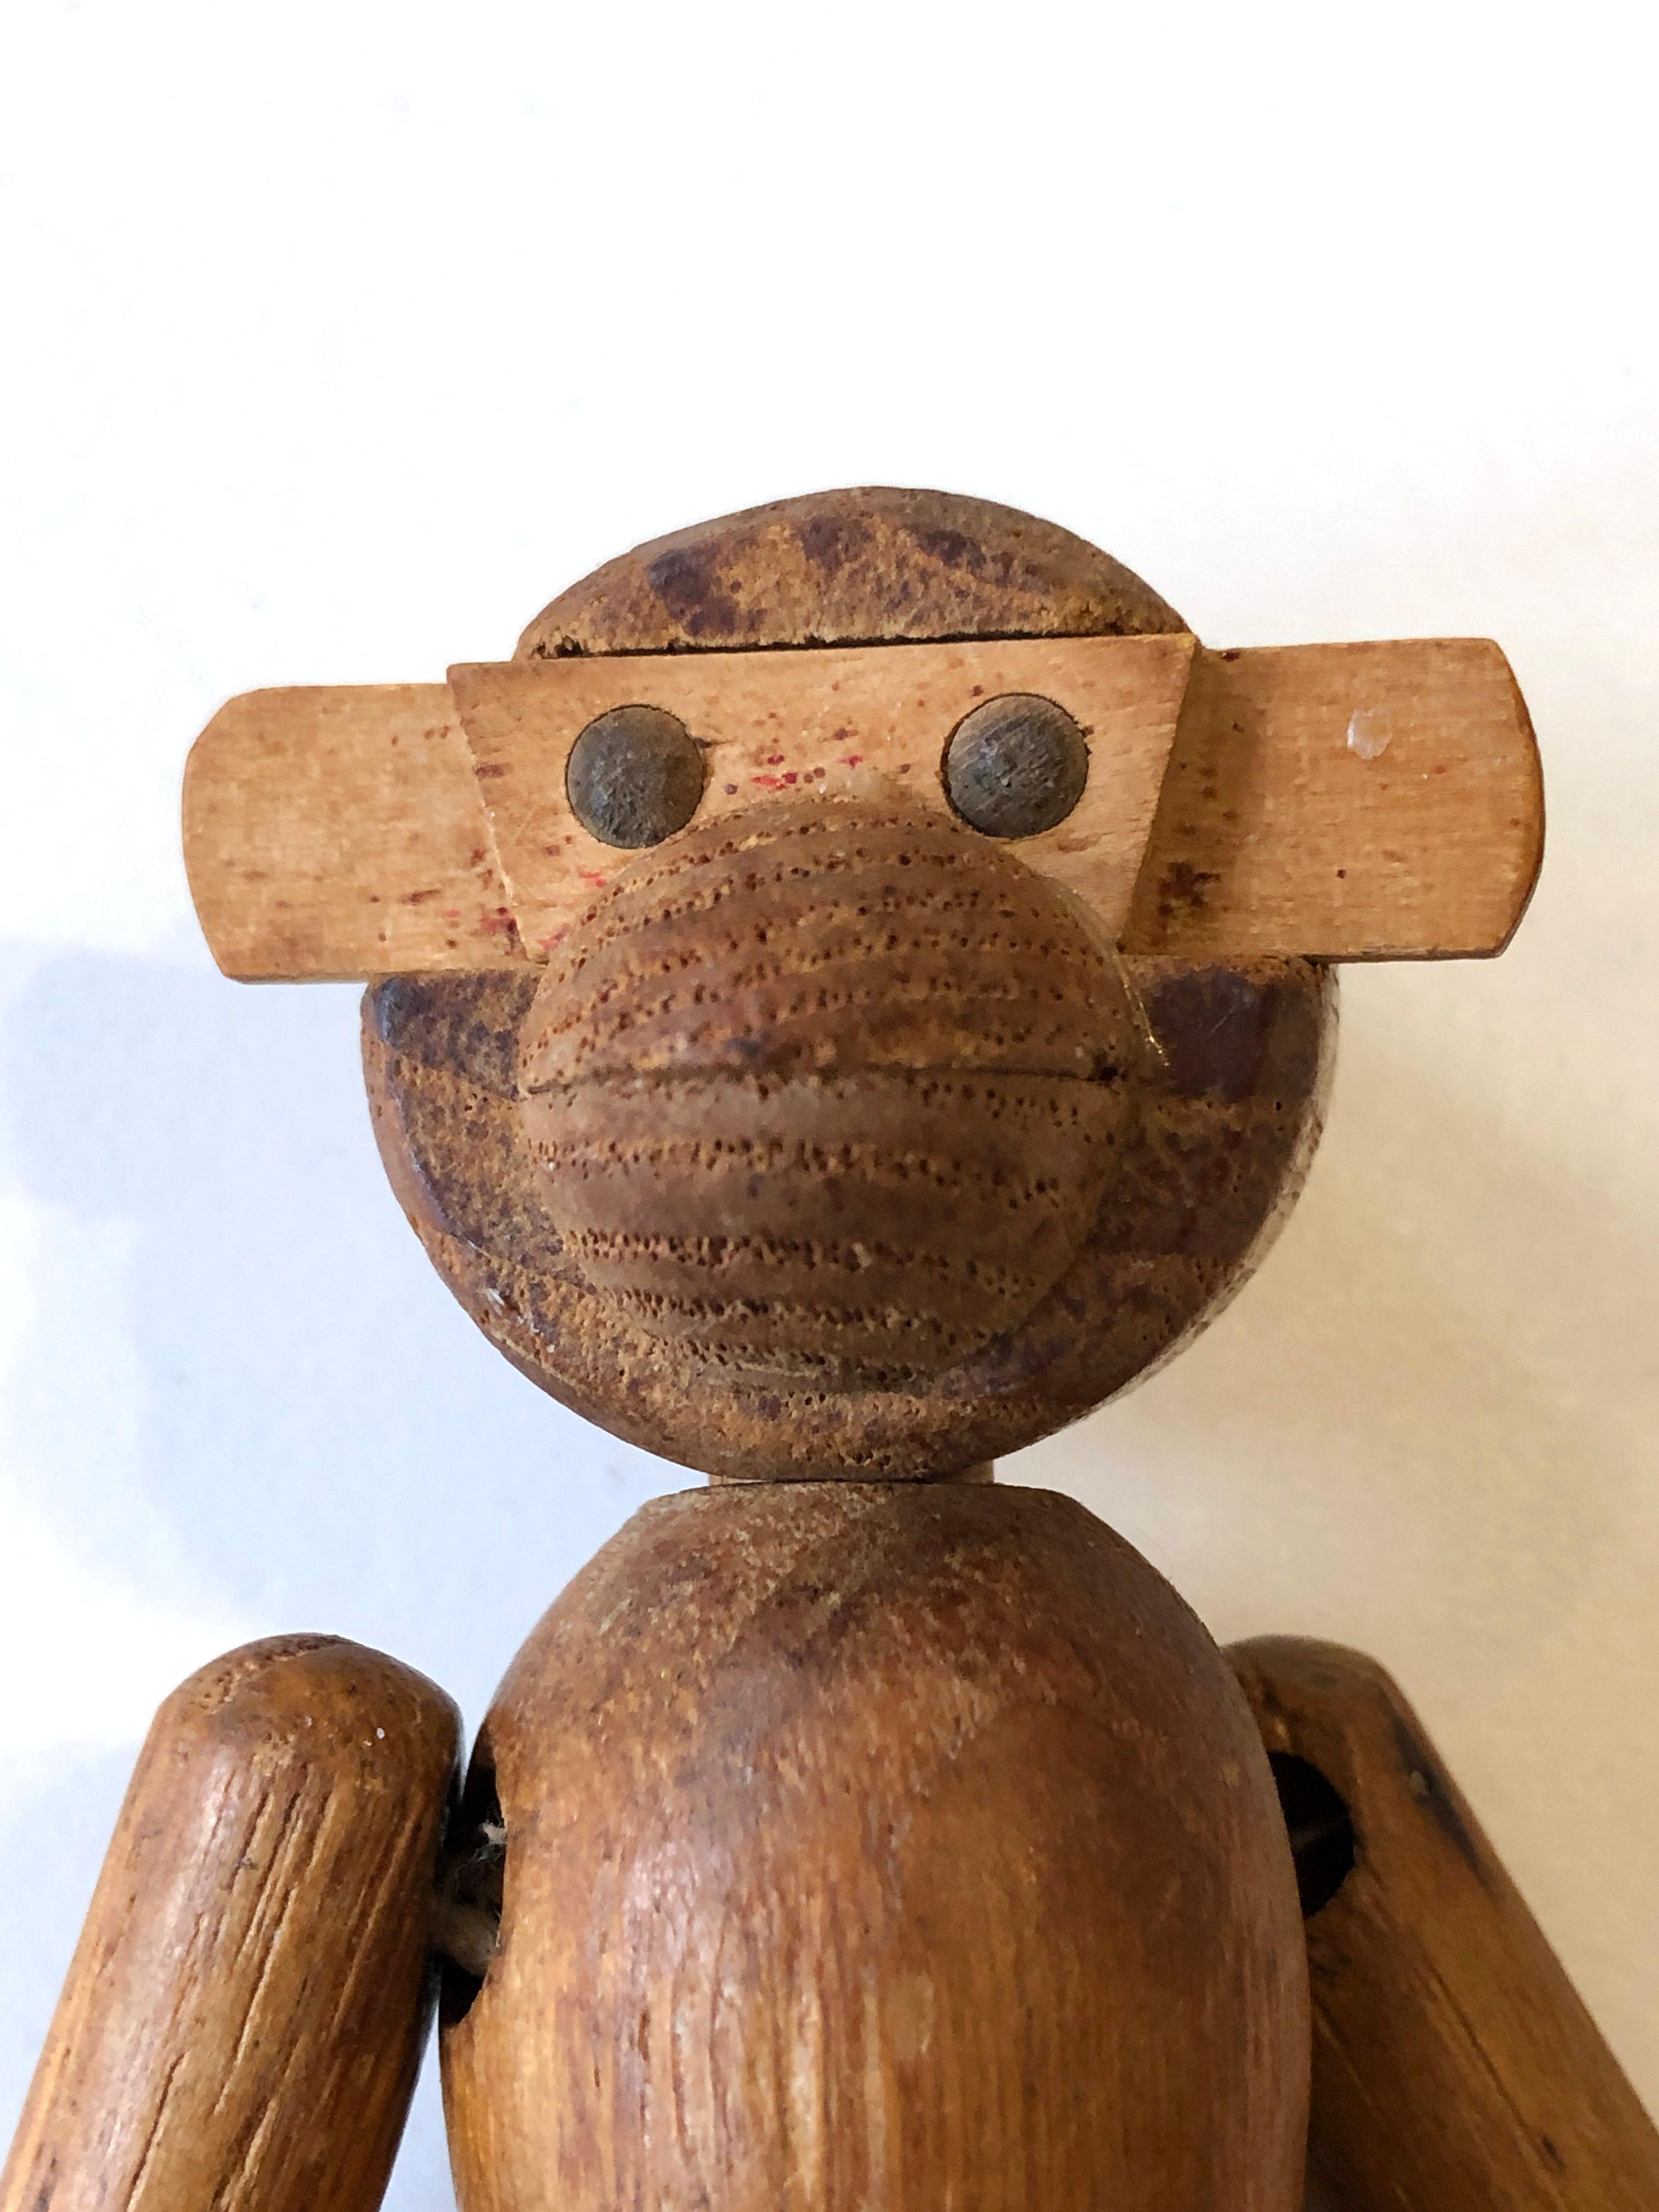 Small vintage 1950's wooden monkey by Kay Bojesen.
In nice original condition - beautiful patina on the wood - one piece of the monkeys left hand is missing. 
See pictures. You can easily restore it.